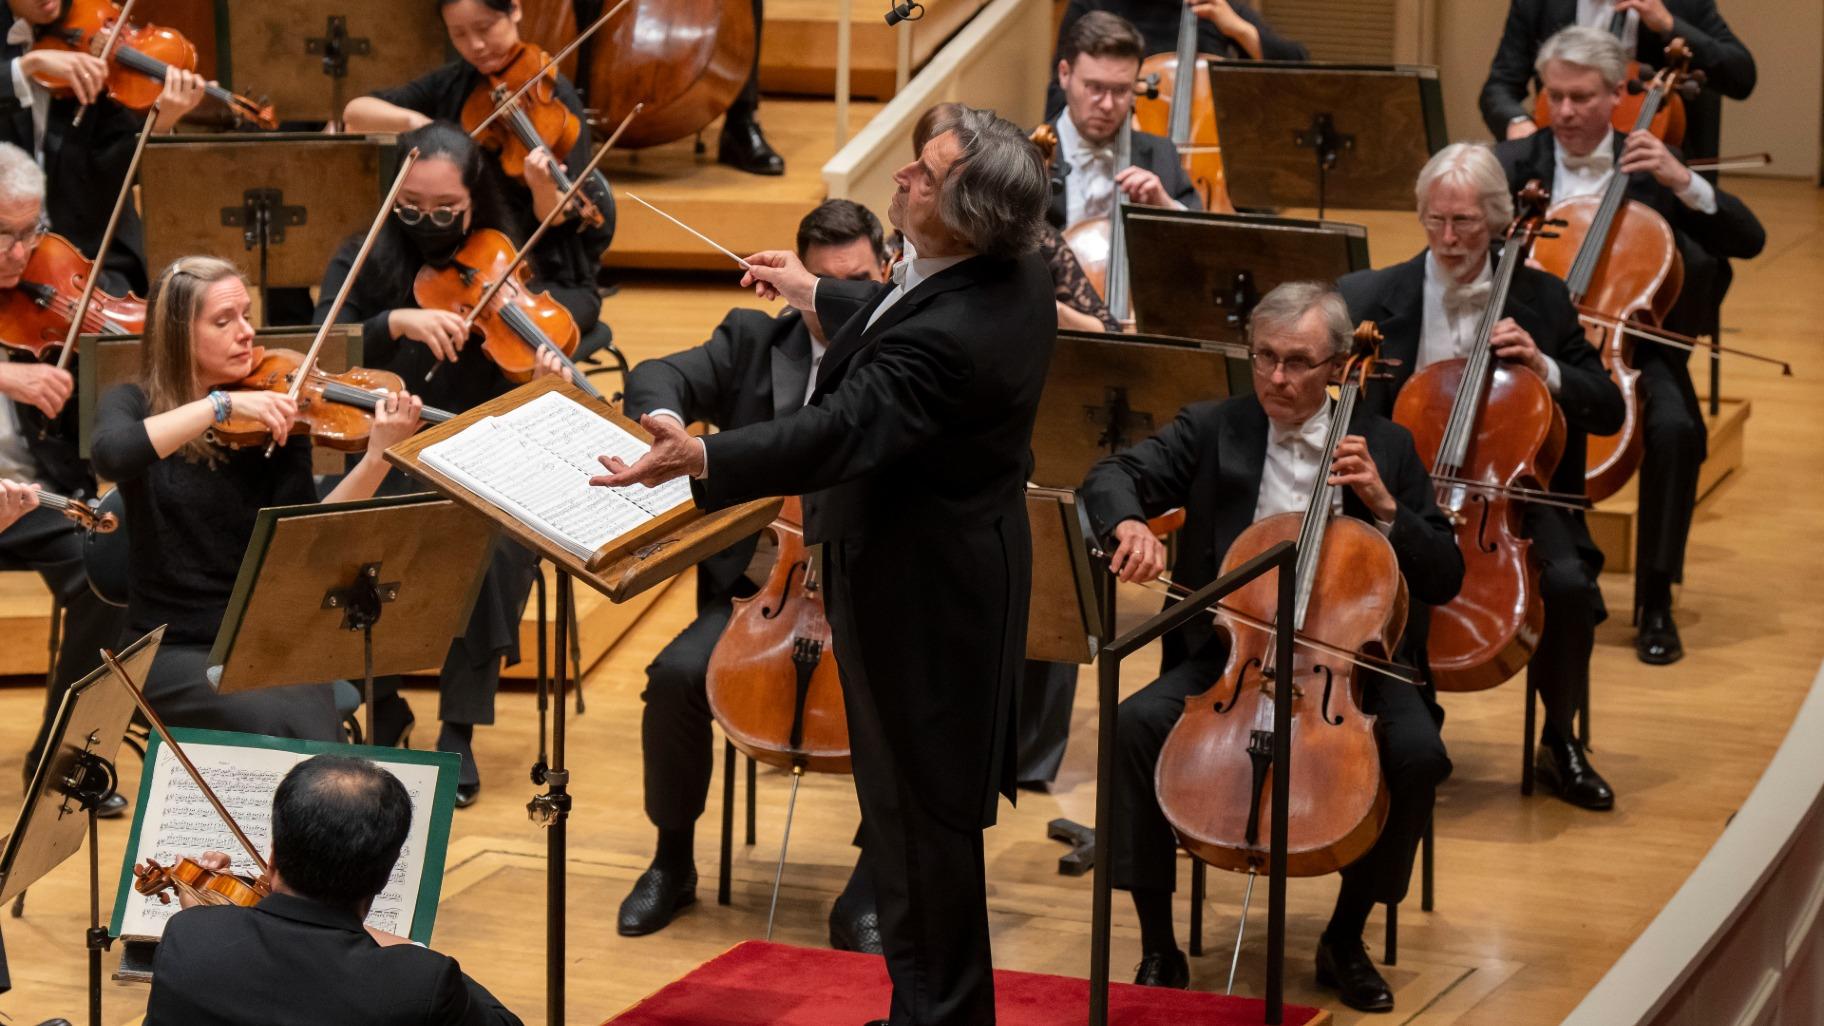 The Chicago Symphony Orchestra performs at Orchestra Hall. (Todd Rosenberg)